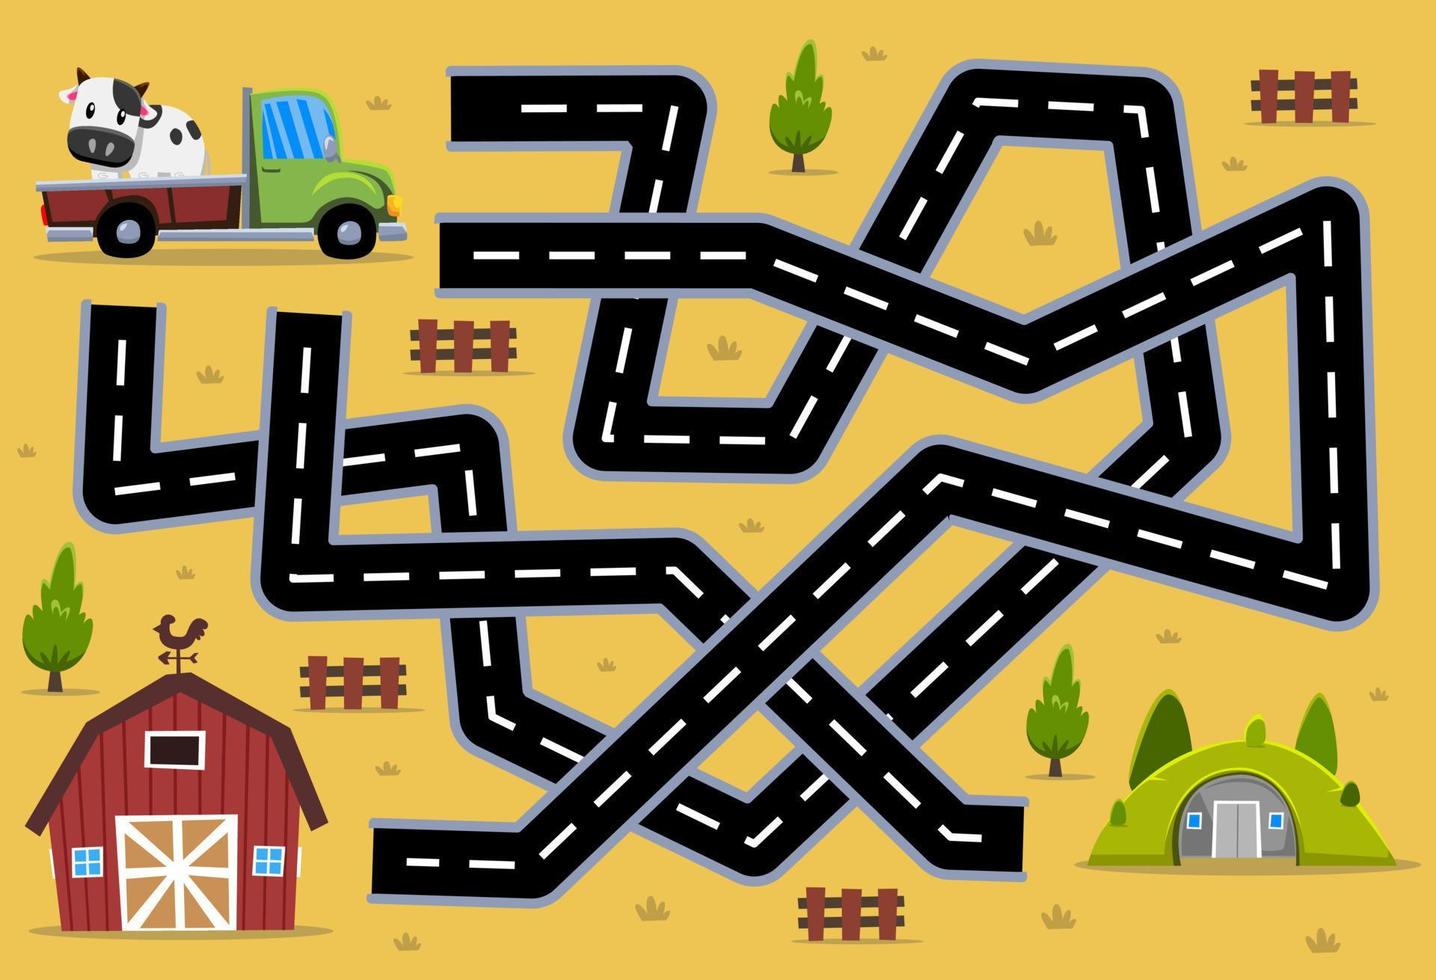 Maze puzzle game for children help cartoon transportation pickup truck find the right path to the barn or shelter vector